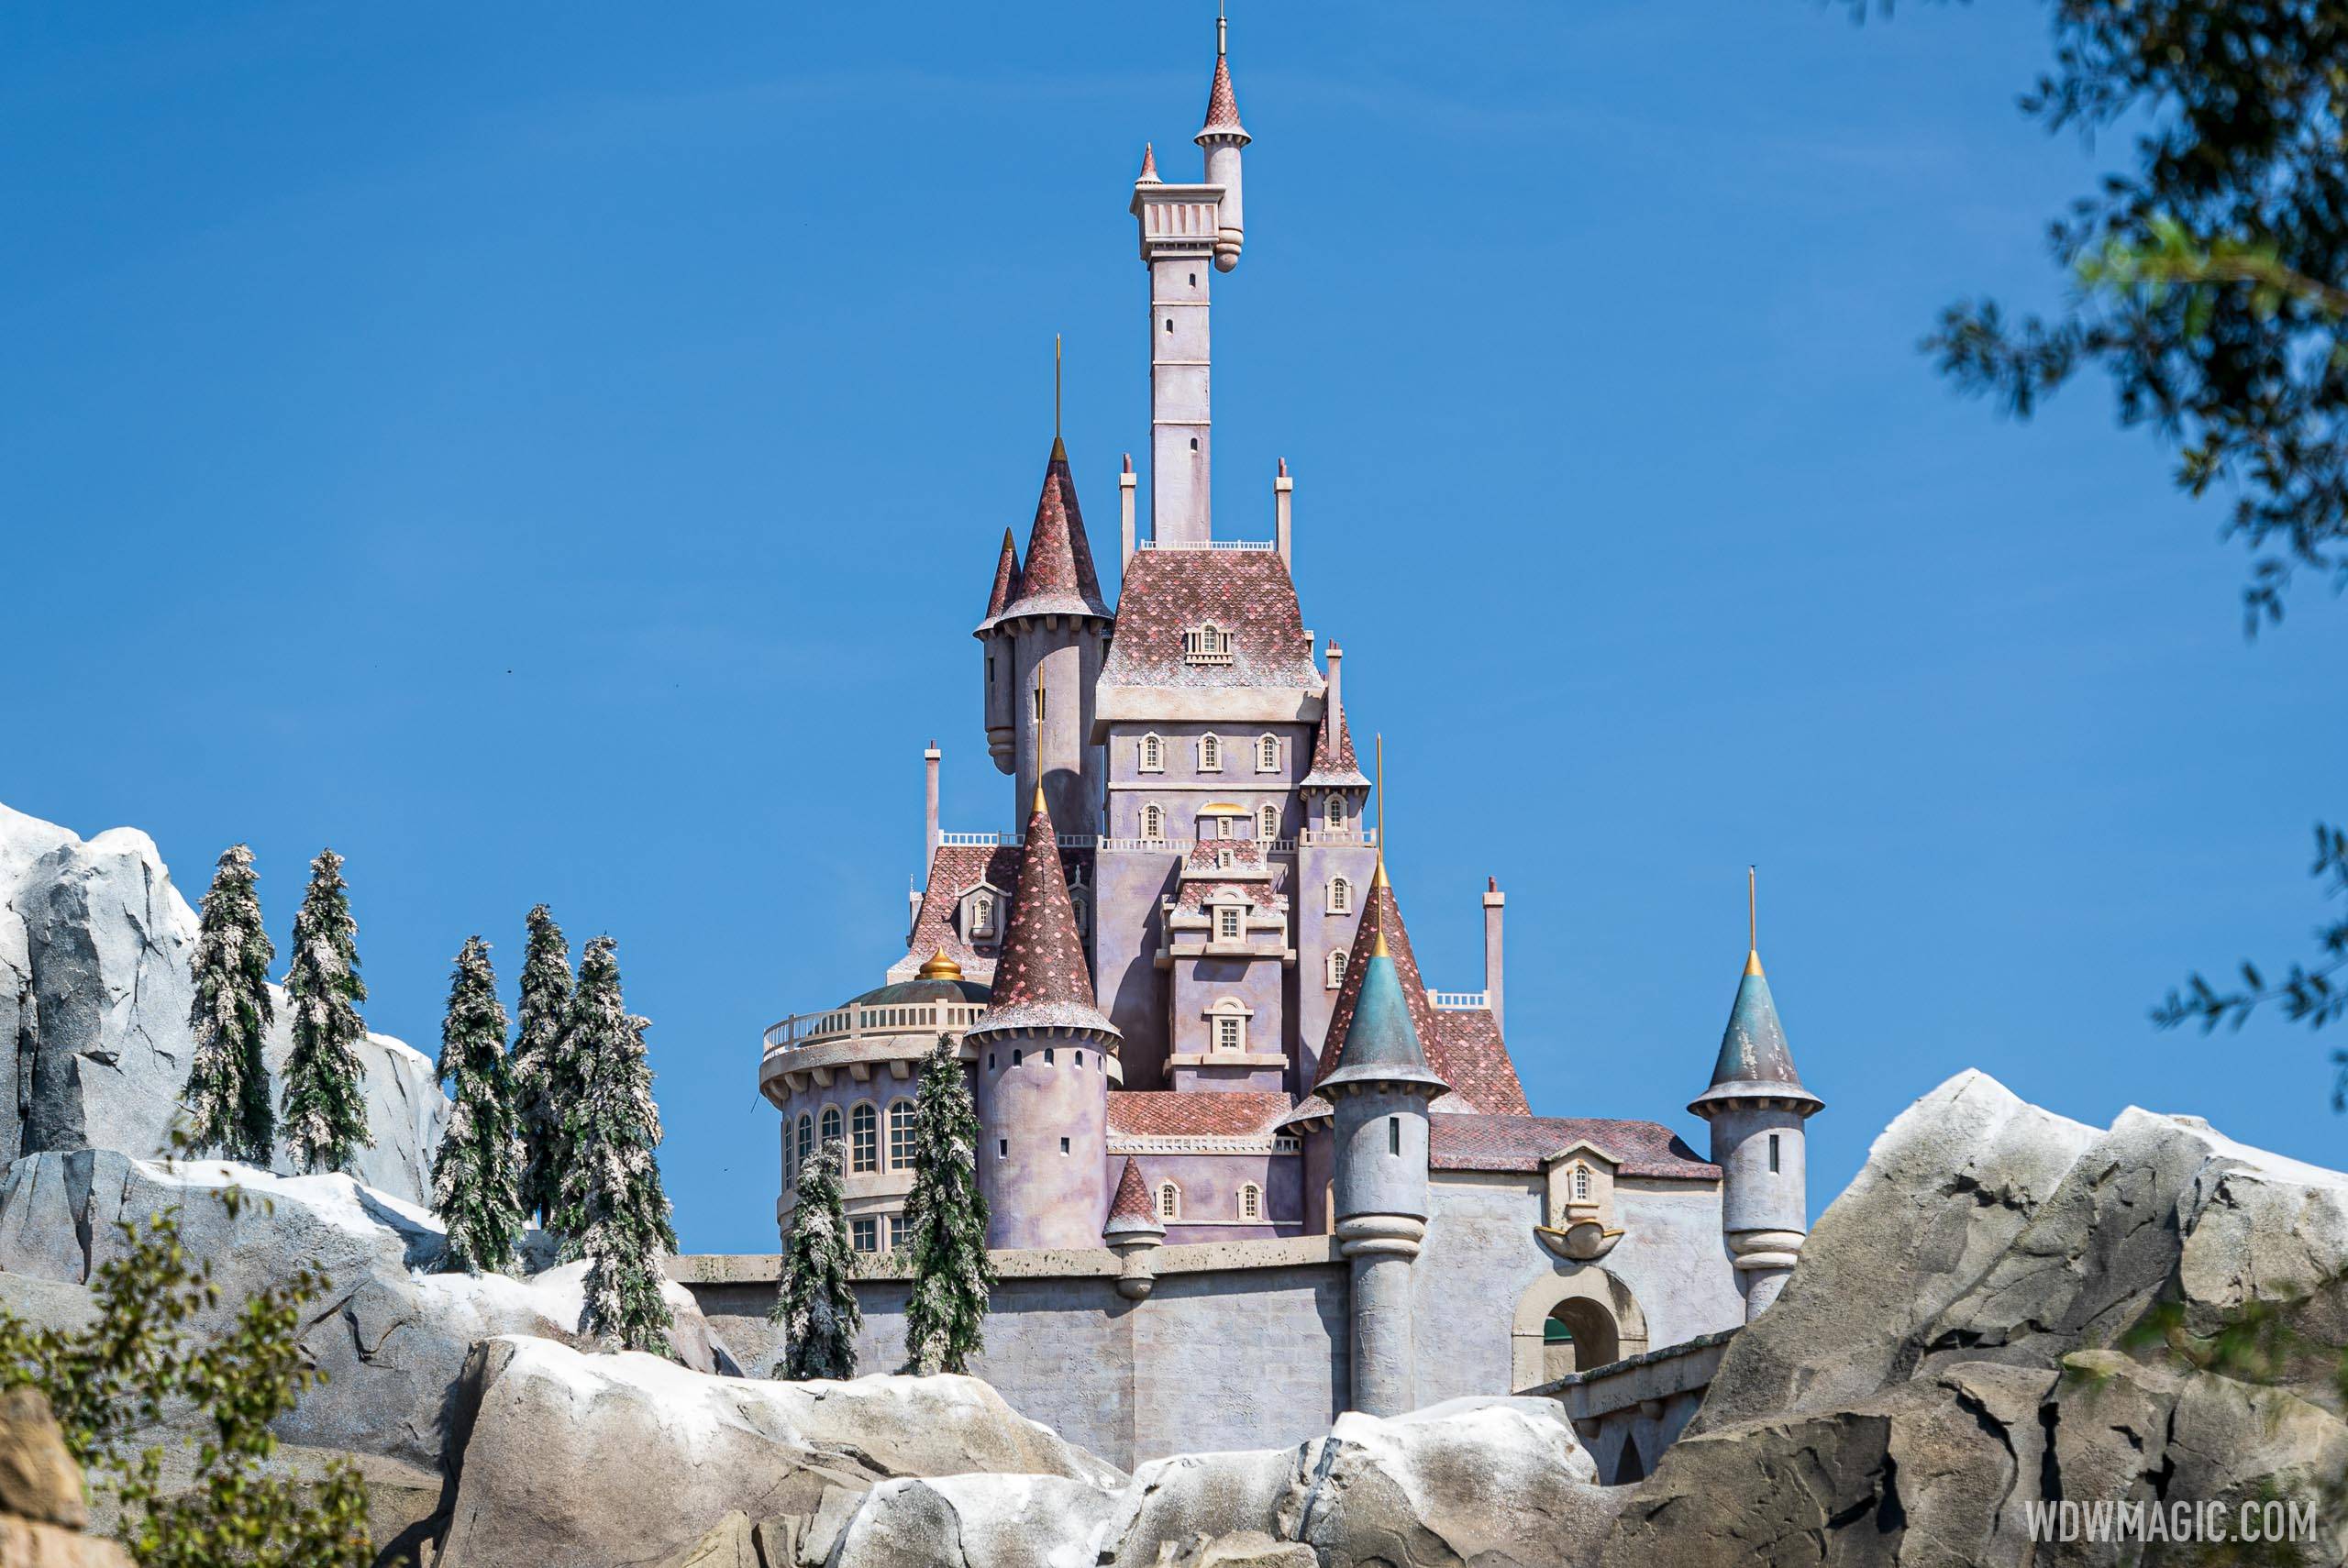 Scaffolding down at Be Our Guest Restaraunt reveals restored Beast's castle that looks better than ever